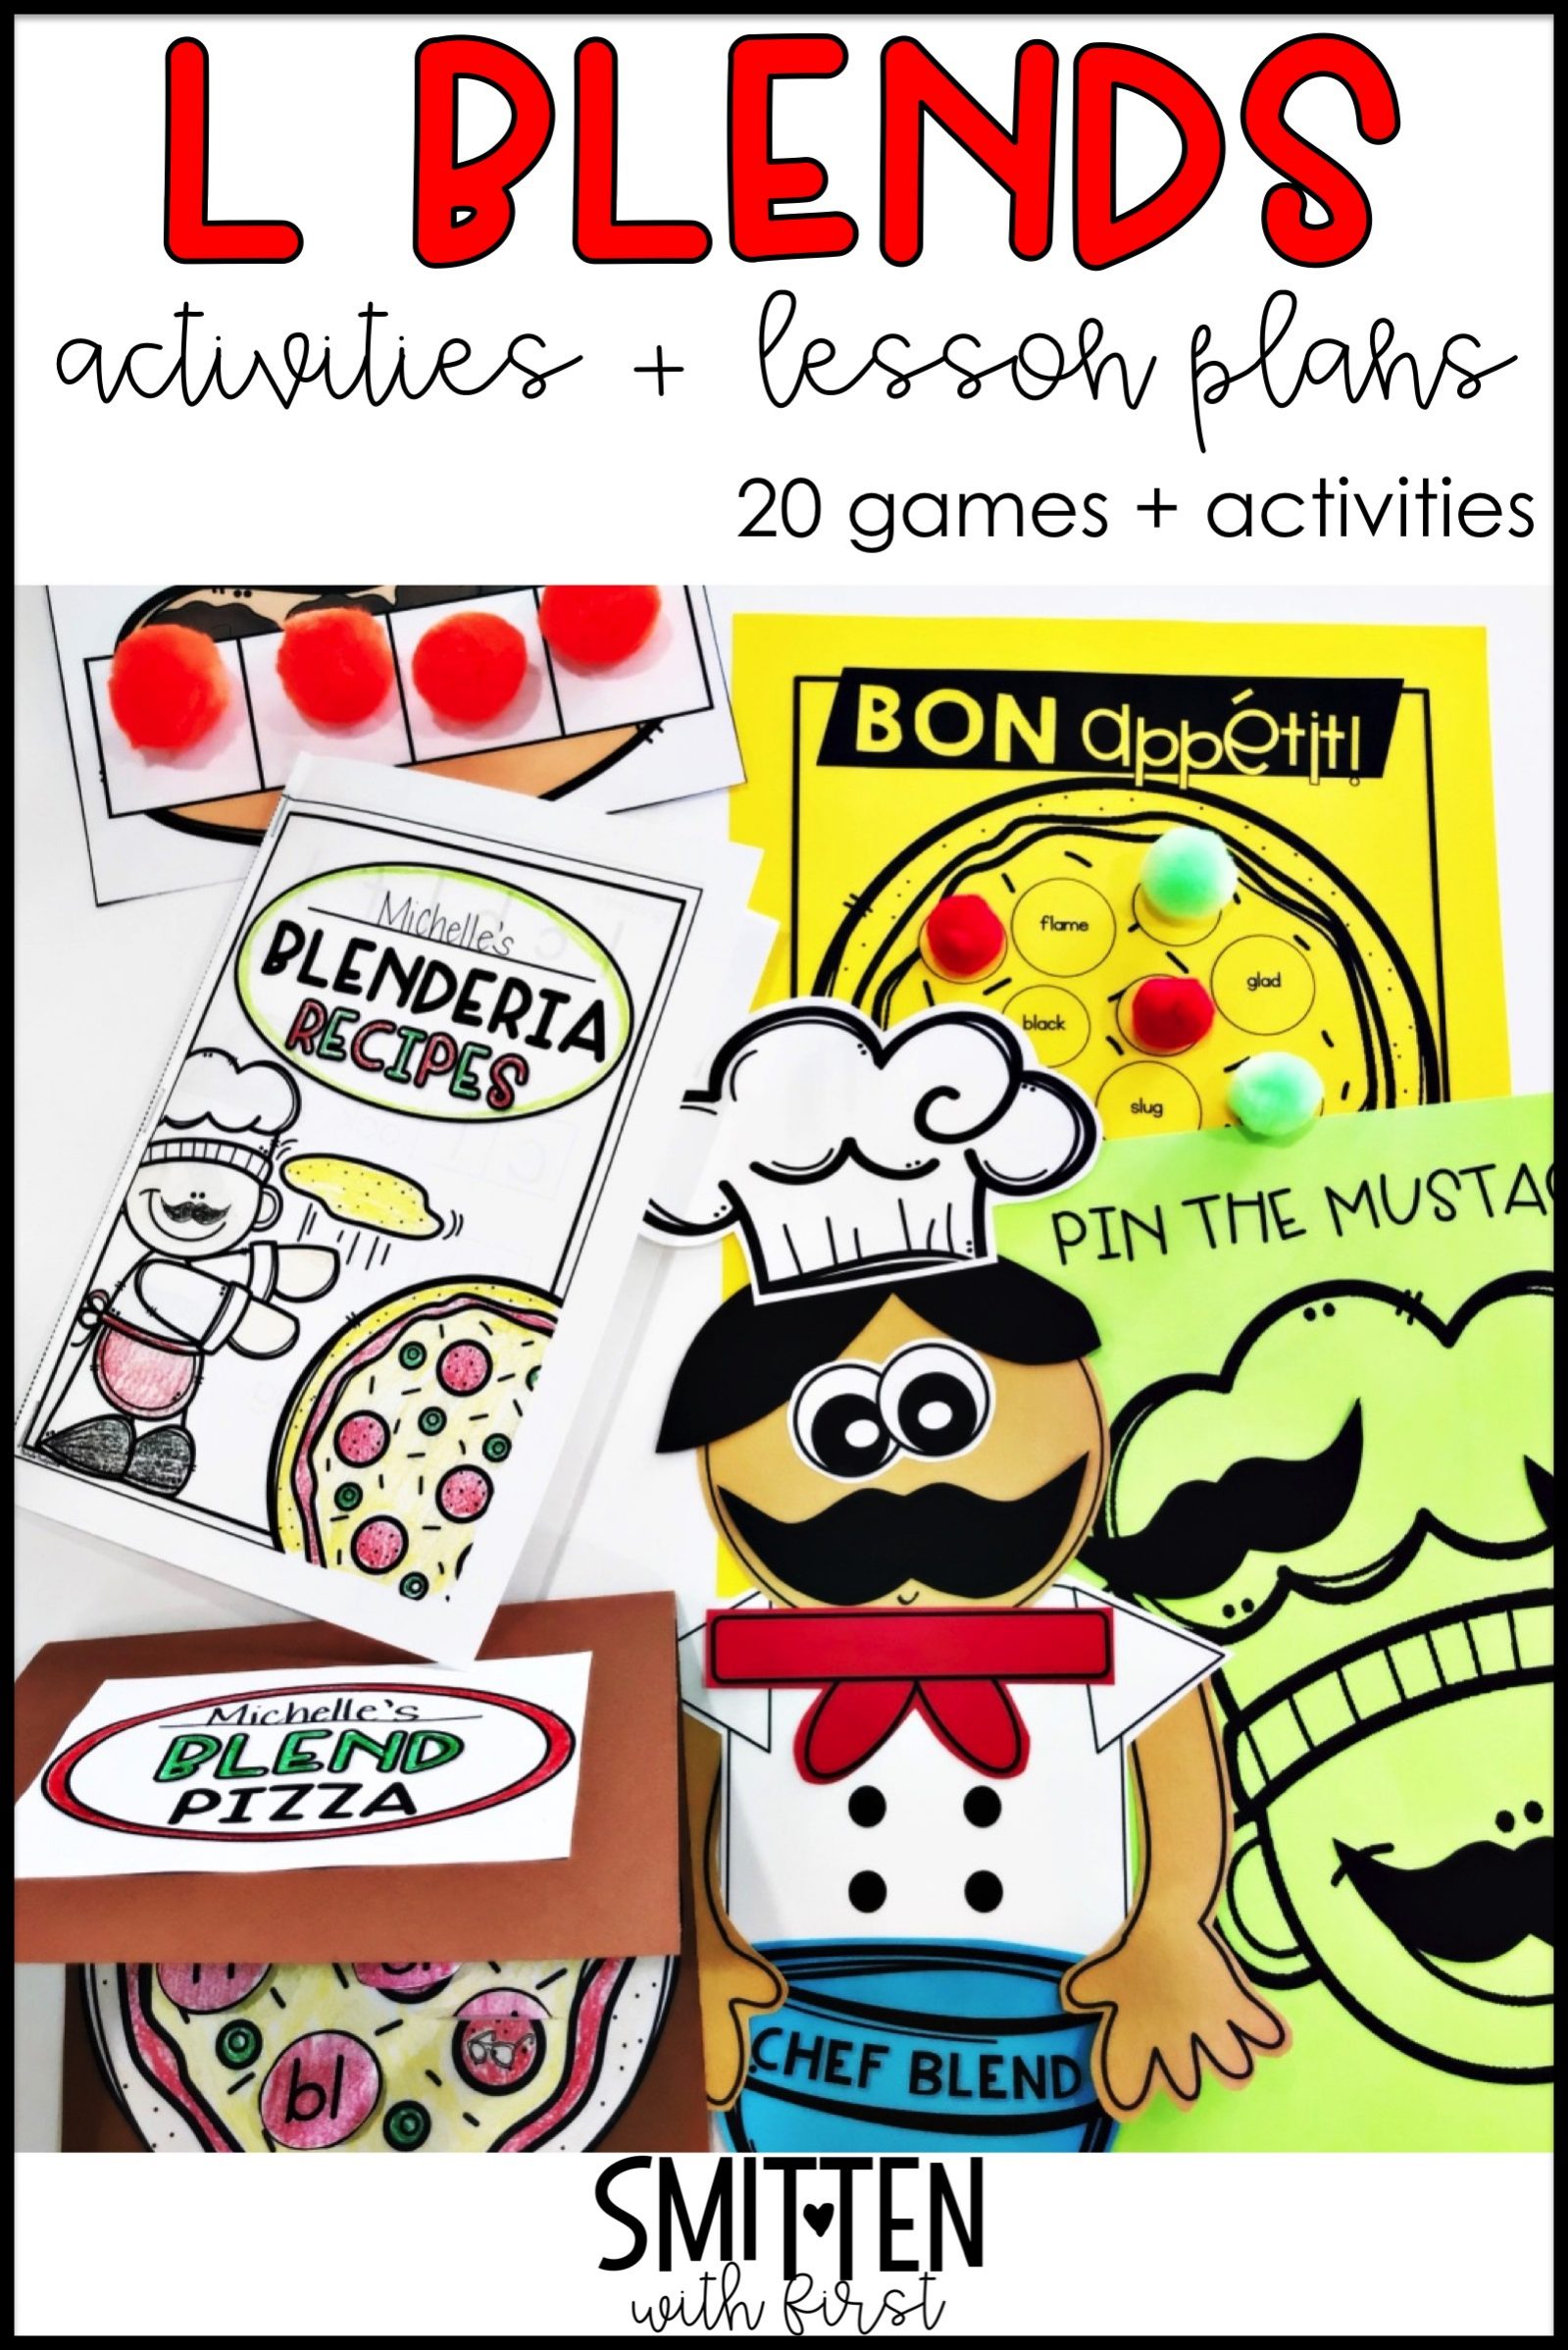 L Blends phonics activities and games